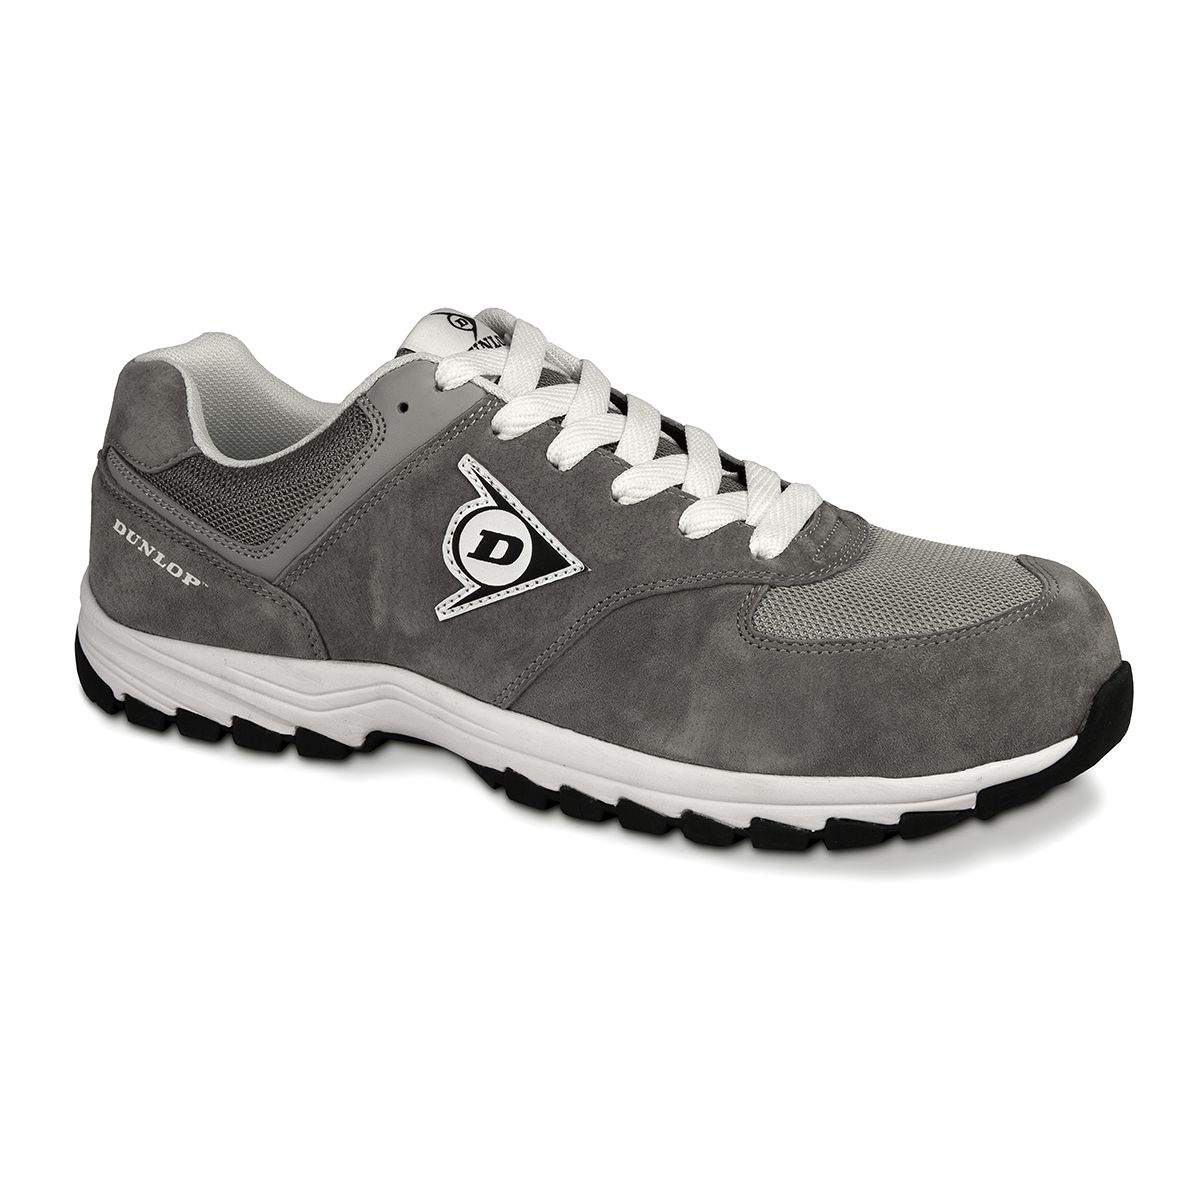 SALE: Dunlop Flying Arrow ED2 S3 safety low shoe, sporty & breathable, grey, size 47